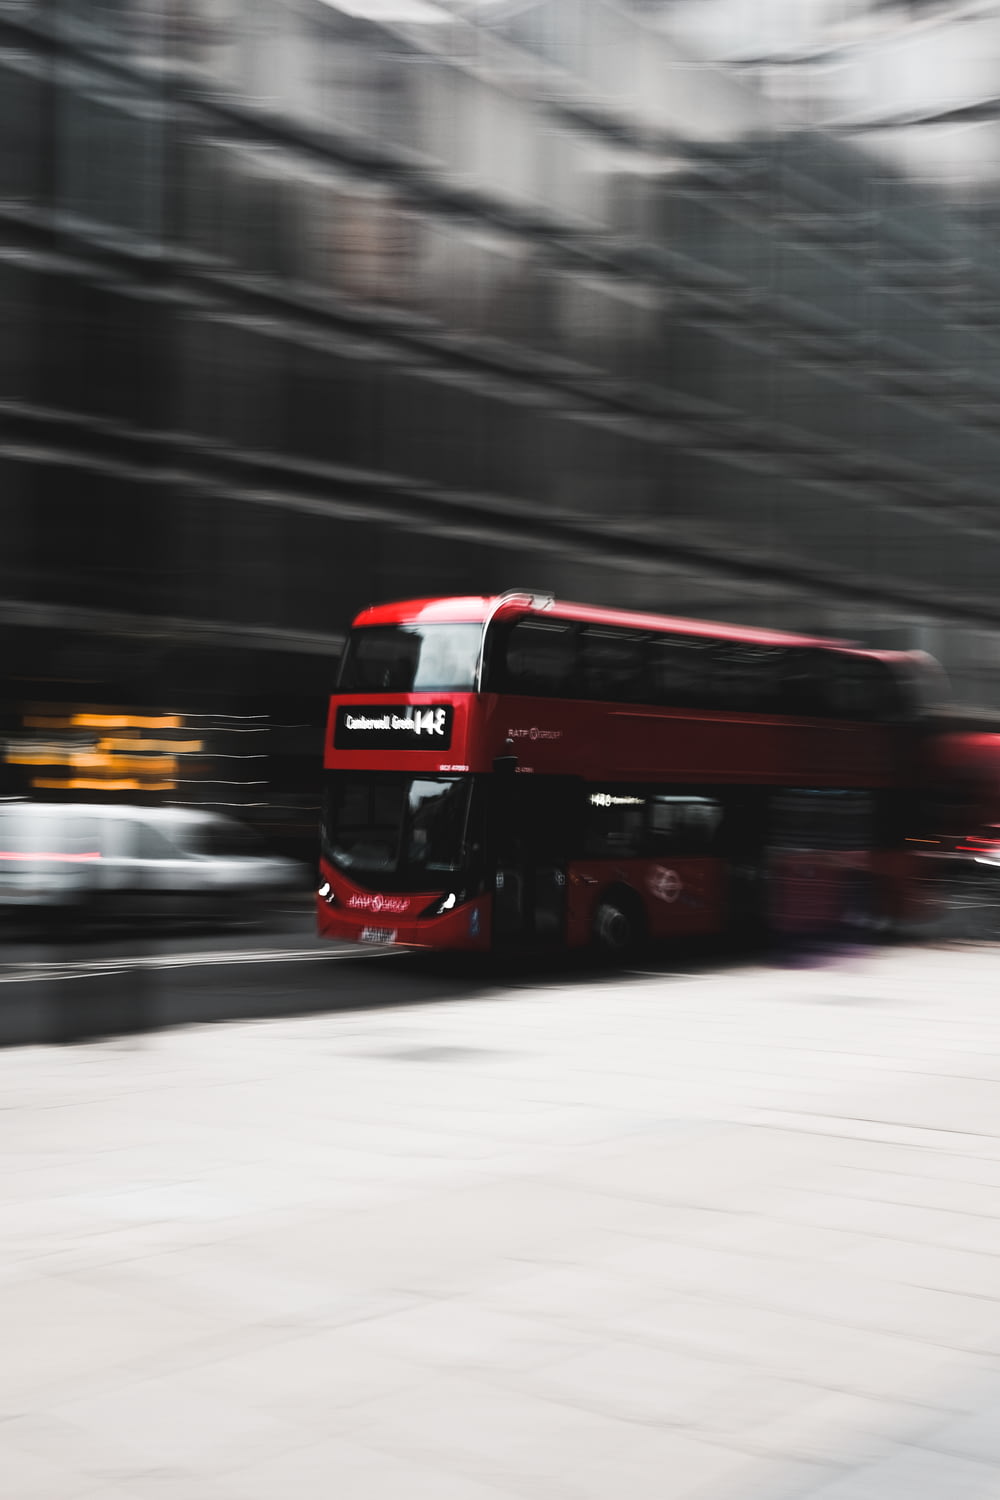 a red bus driving down a street next to a tall building